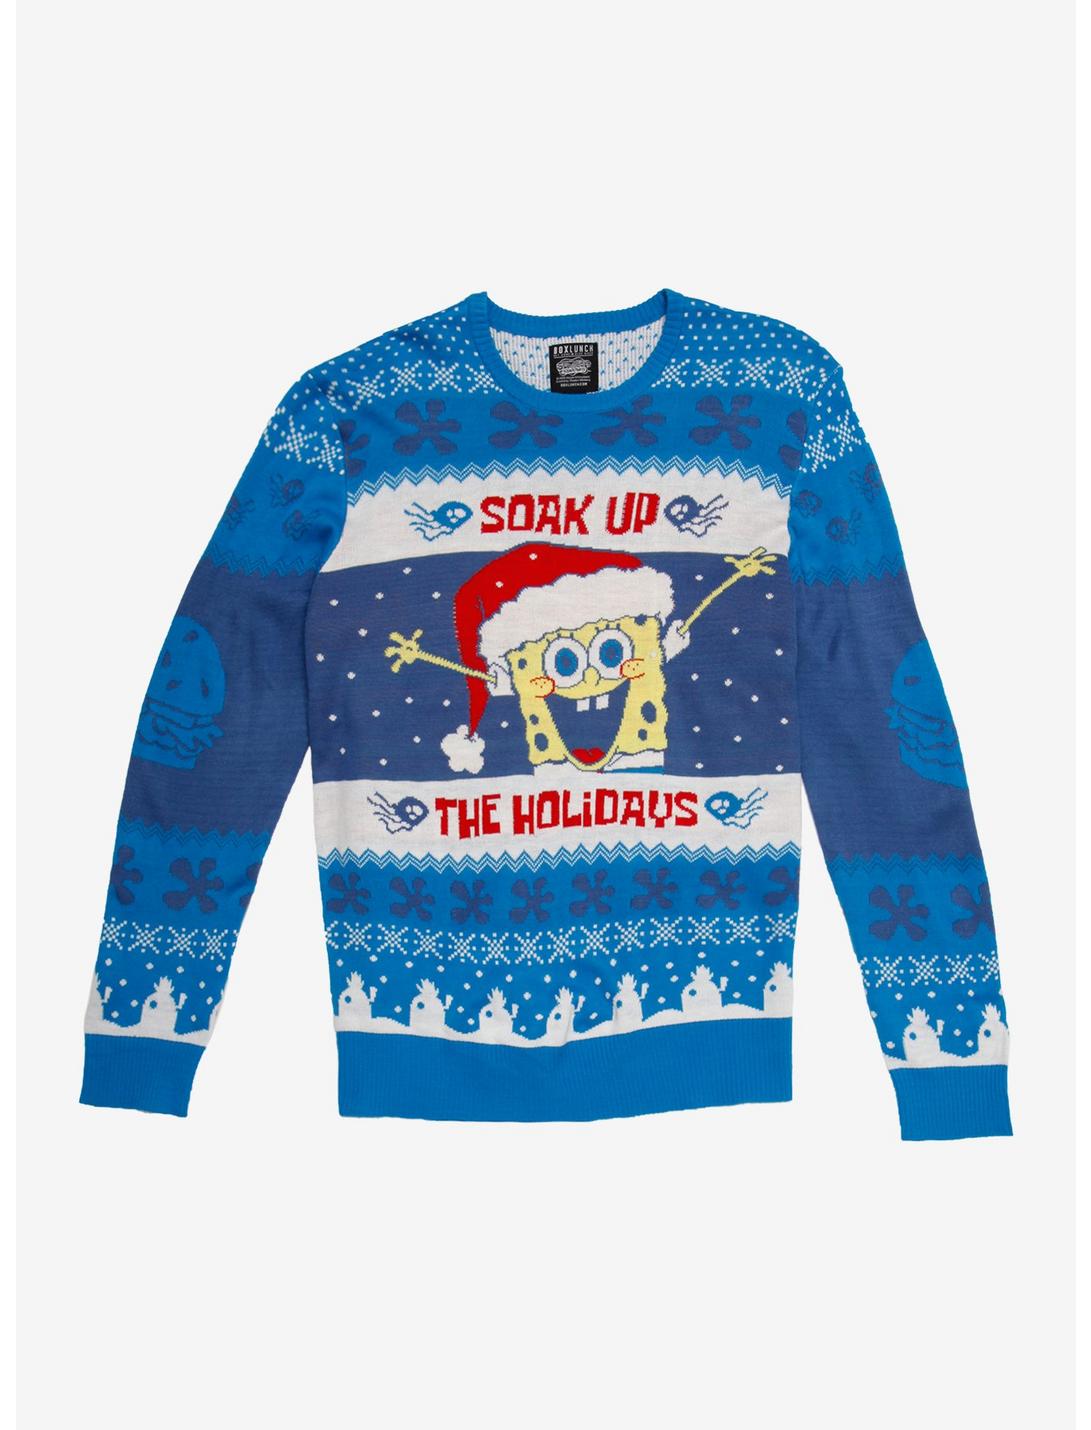 SpongeBob SquarePants Soak Up The Holidays Holiday Sweater - BoxLunch Exclusive, BLUE, hi-res